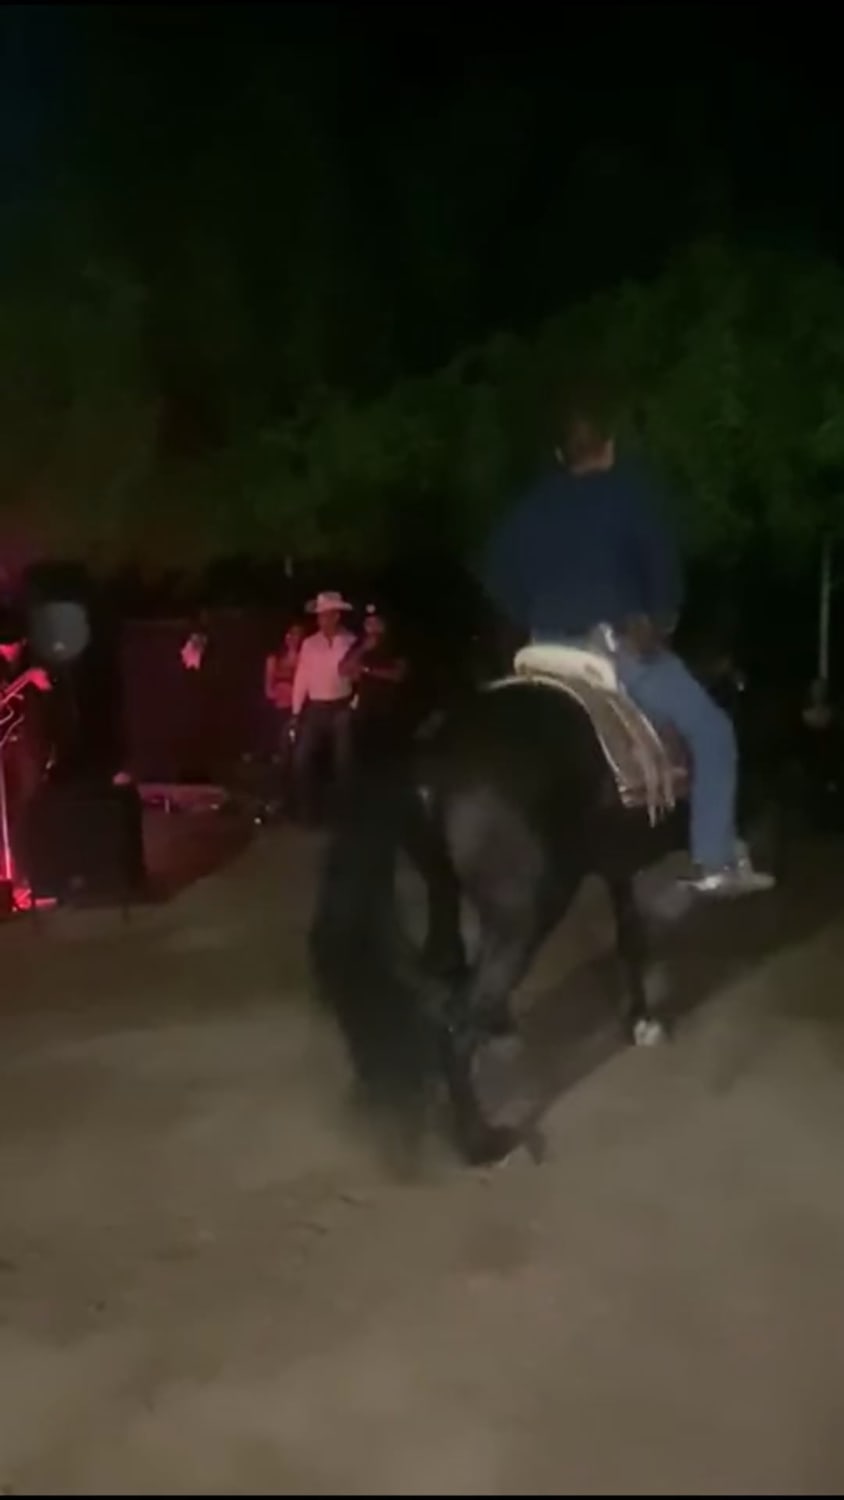 Dancing horse doesn’t like the music